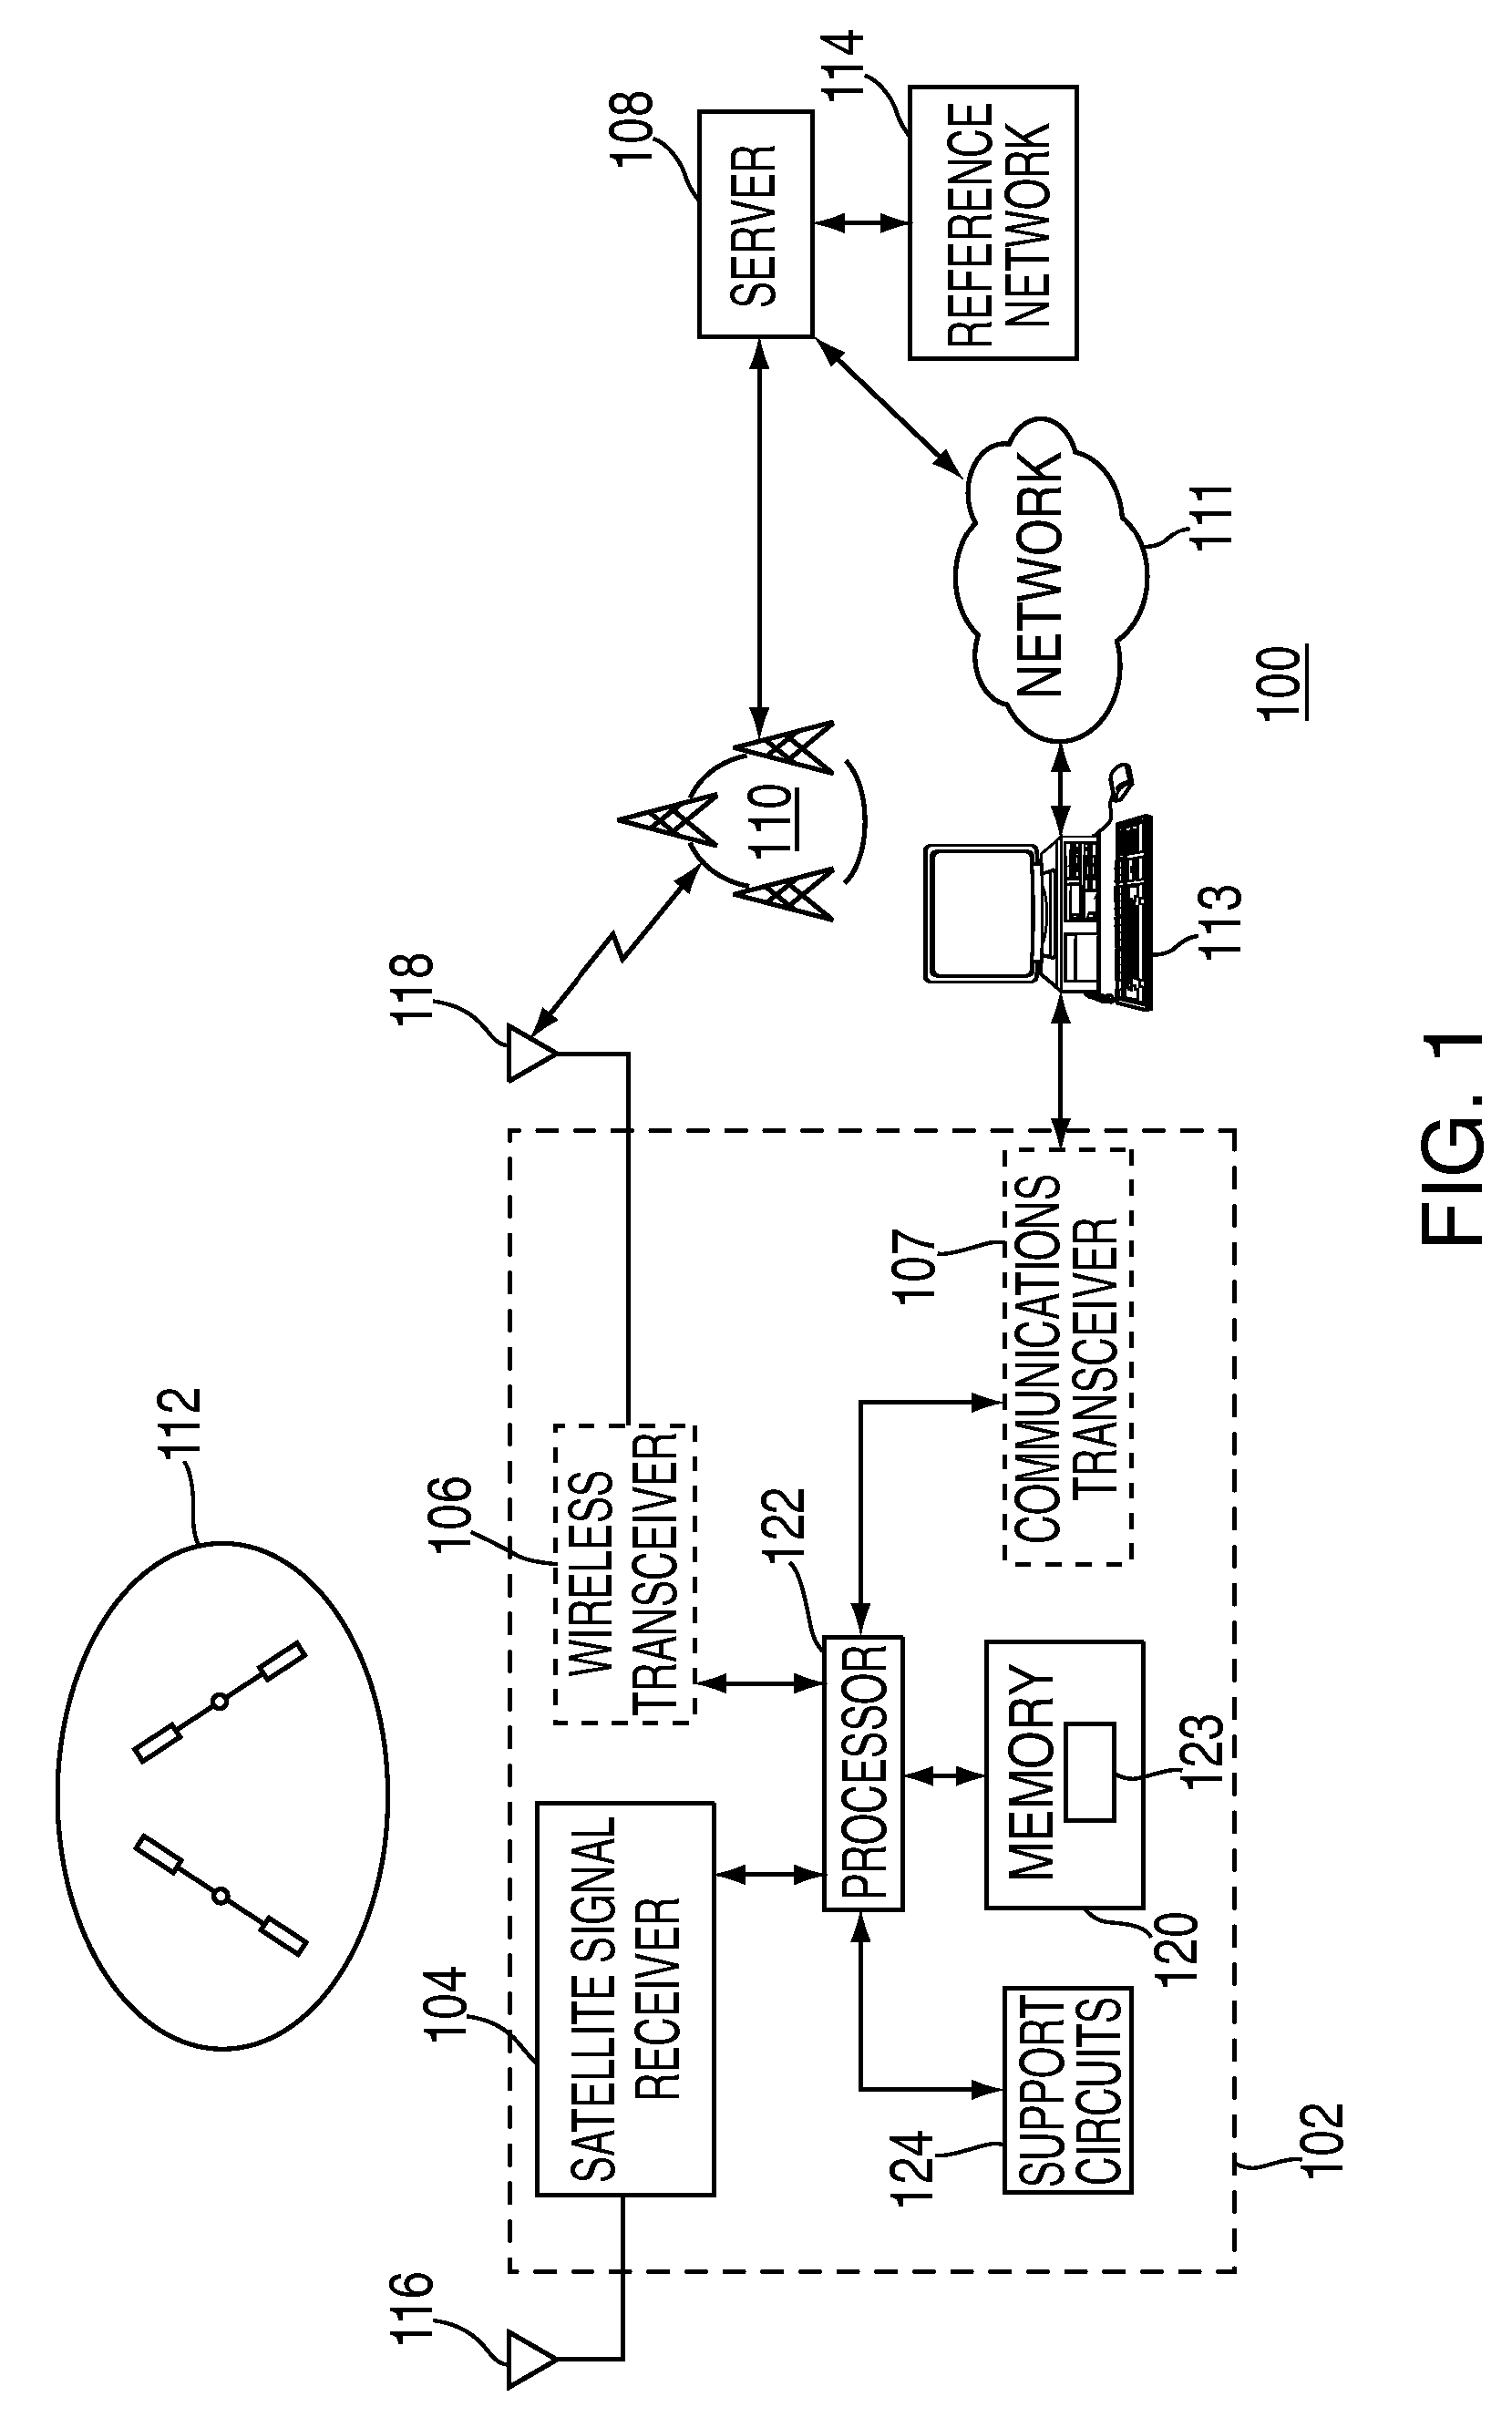 Method and apparatus for mitigating multipath effects at a satellite signal receiver using a sequential estimation filter